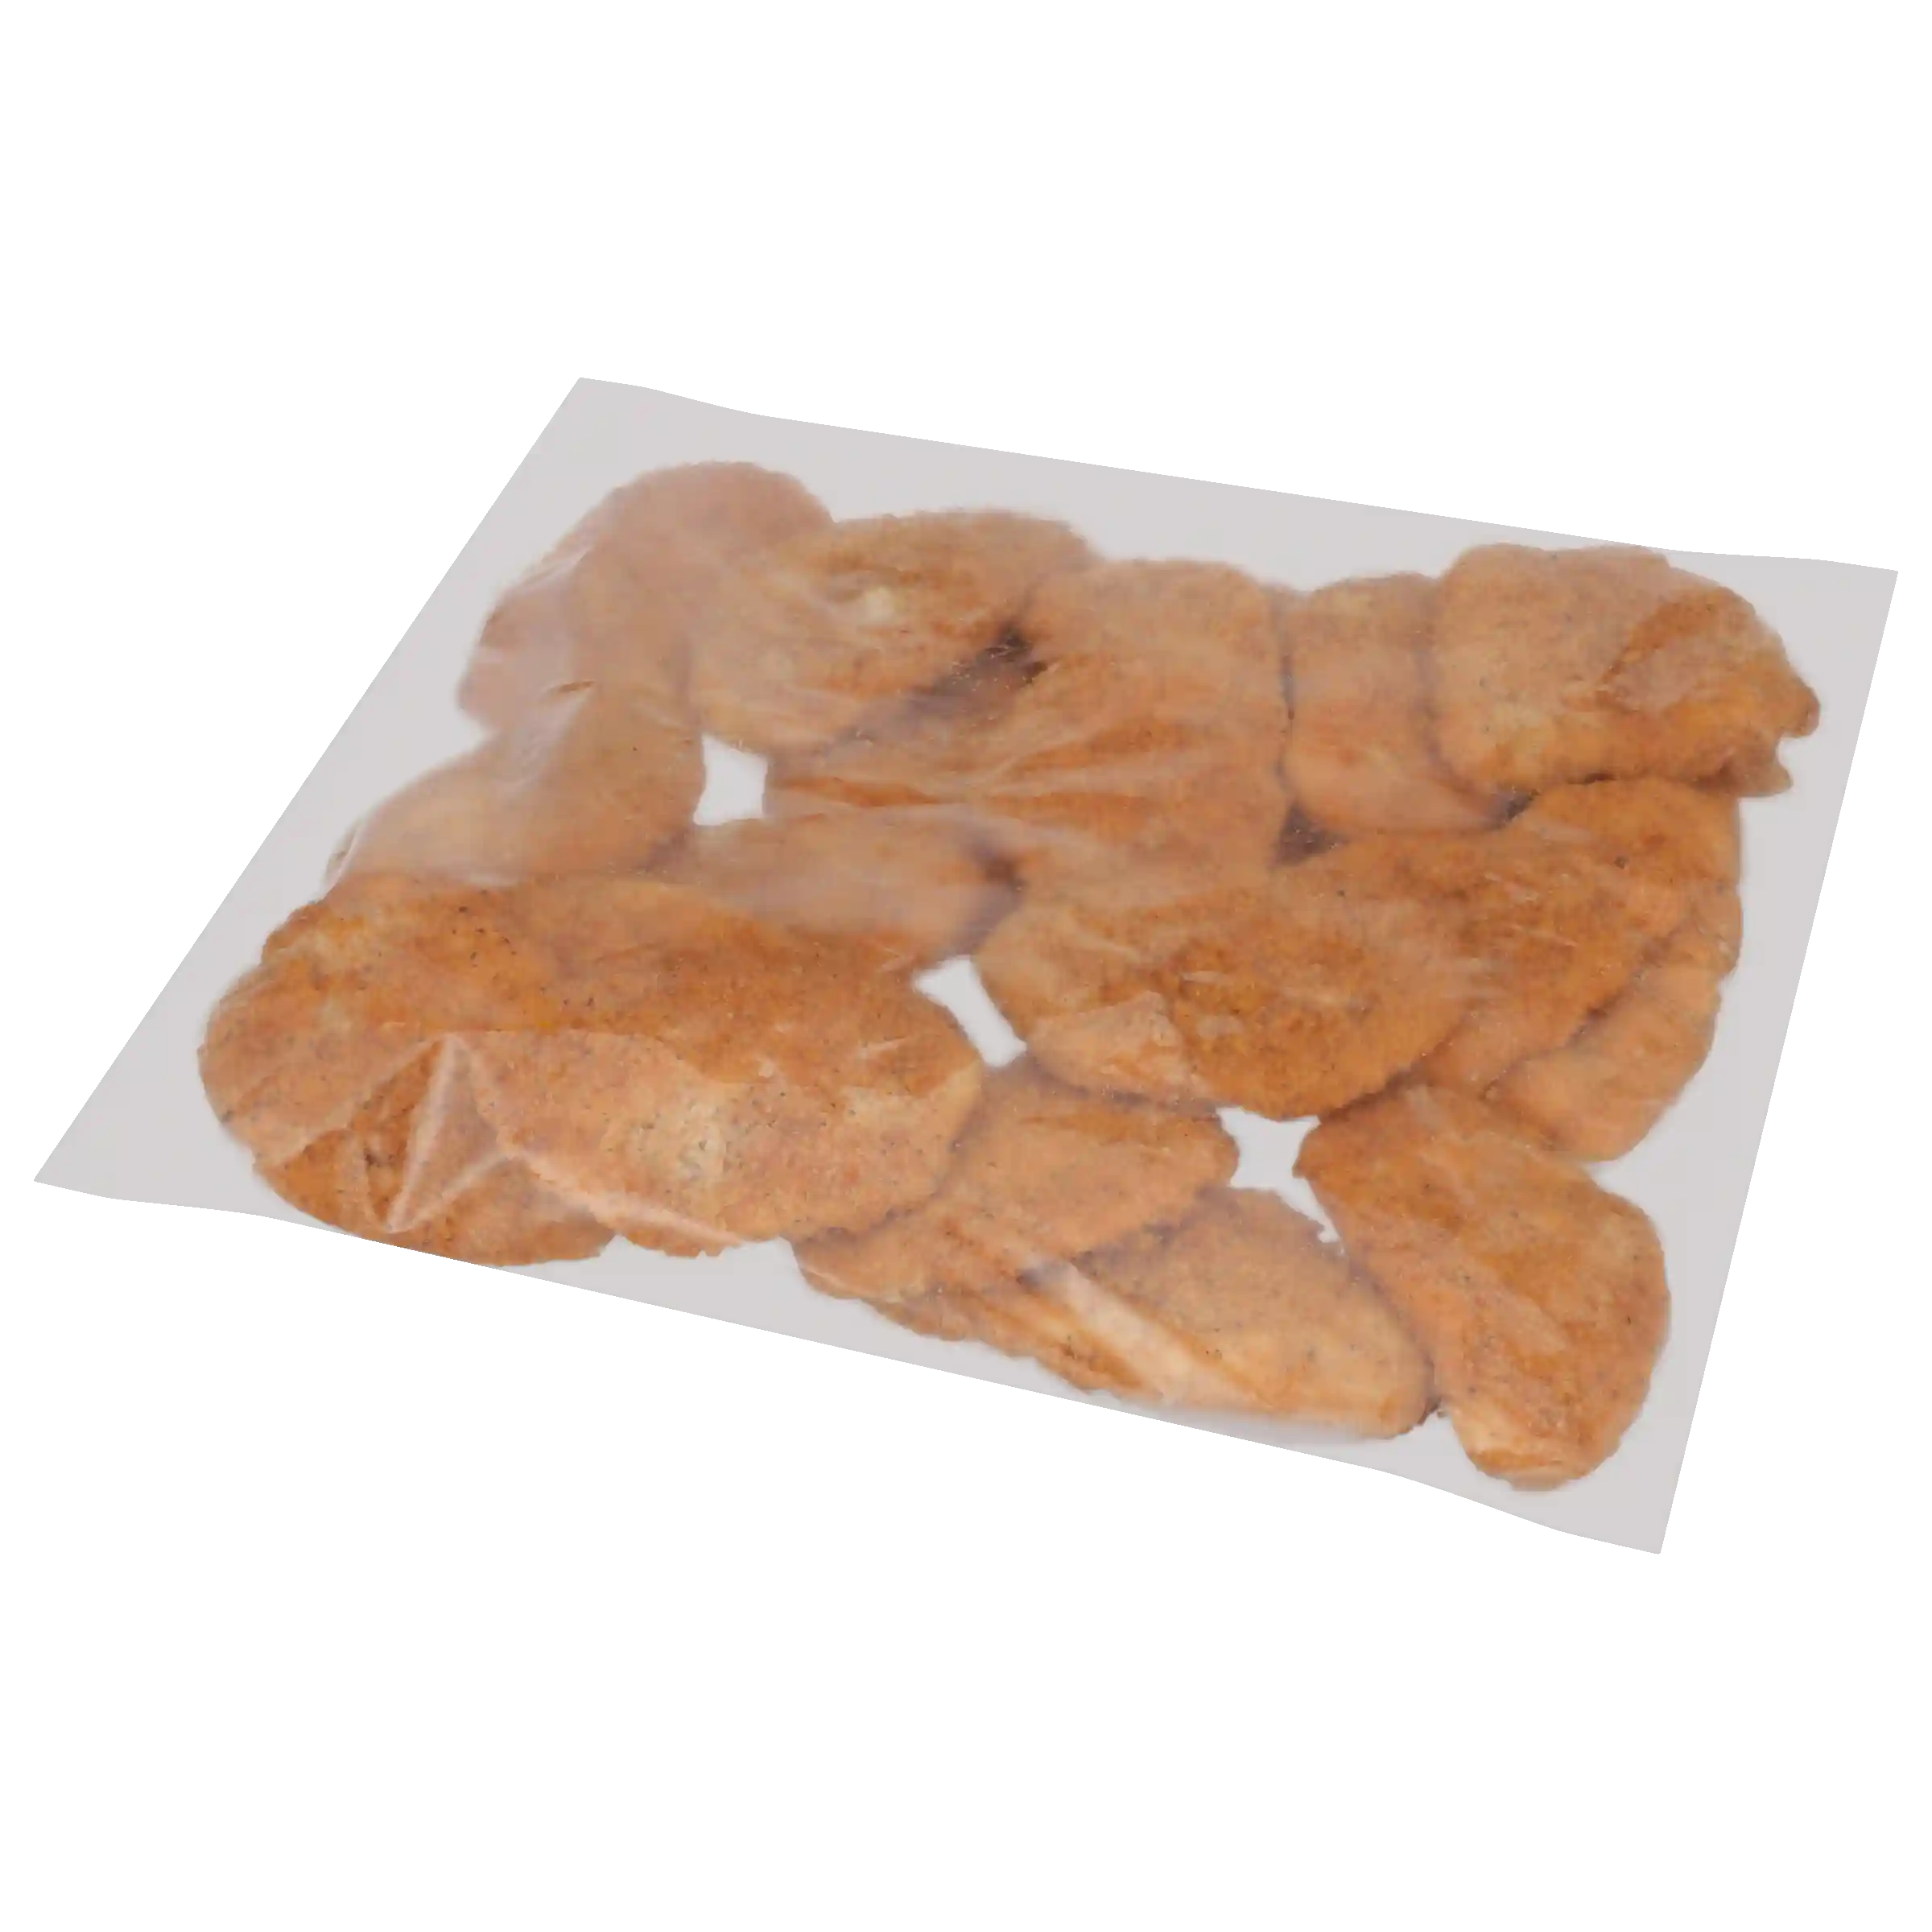 Tyson Red Label® Fully Cooked Hot & Spicy Select Cut Chicken Breast Filet Fritters, 3.5 oz. _image_21